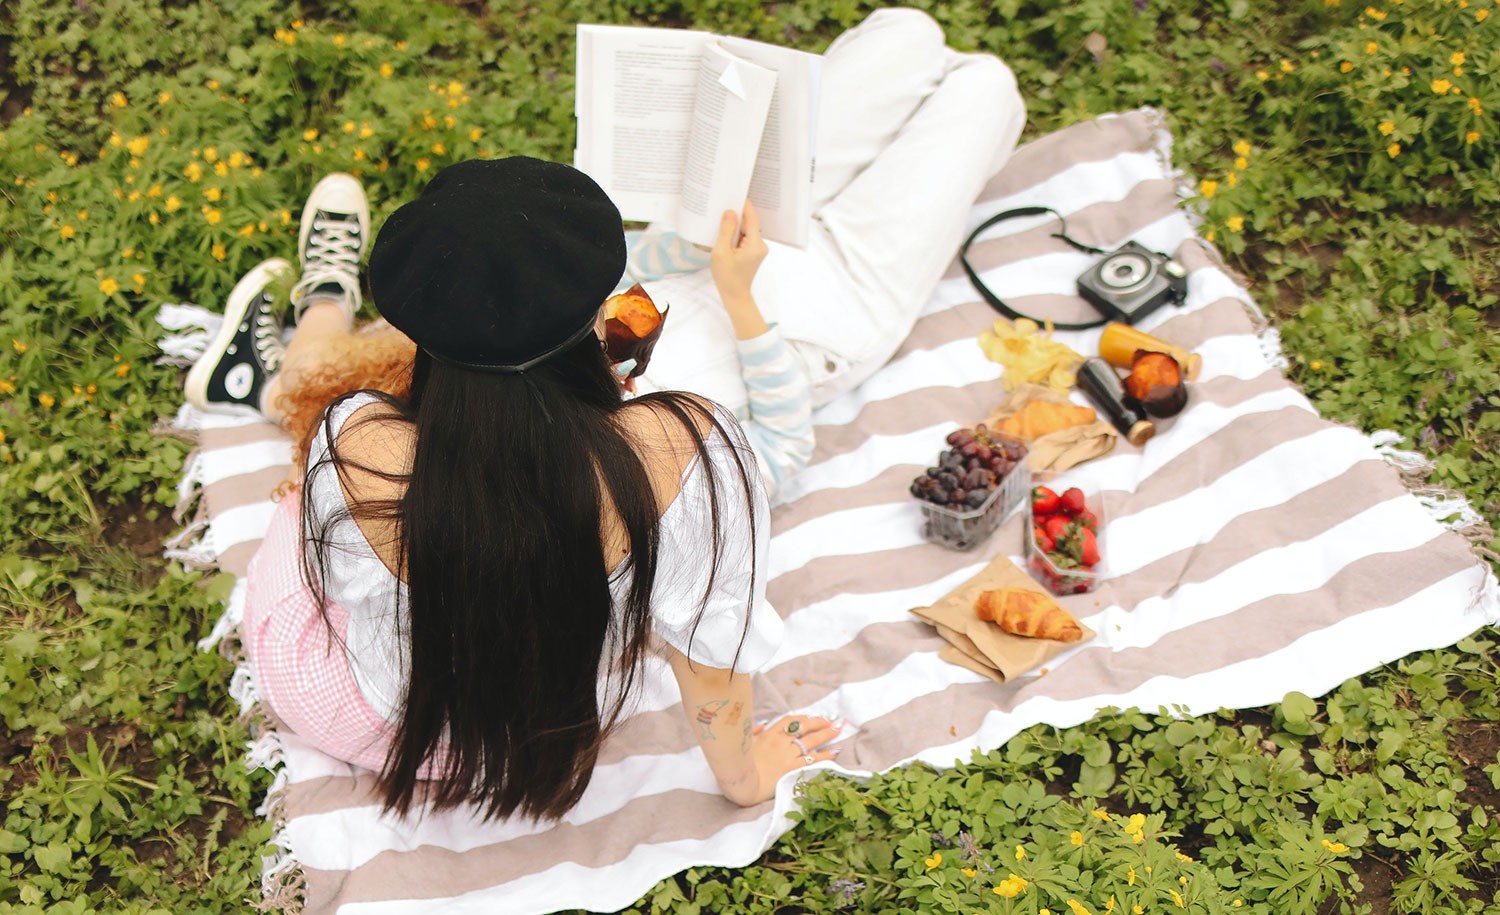 An introvert has a picnic out in nature